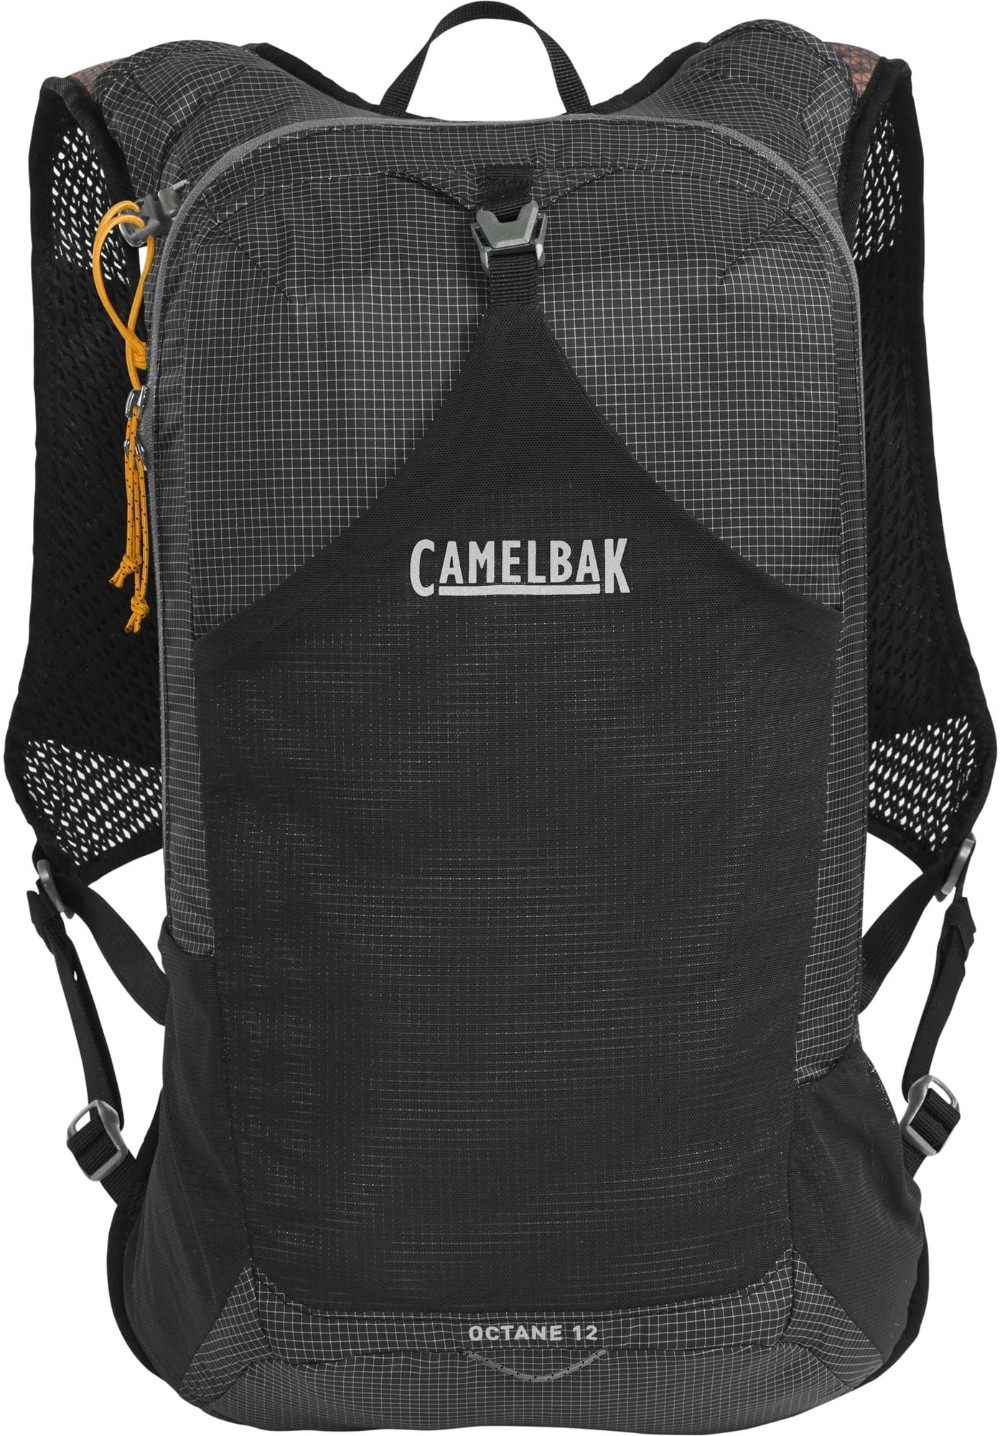 Octane 12 Fusion 2L Hydration Pack image 2